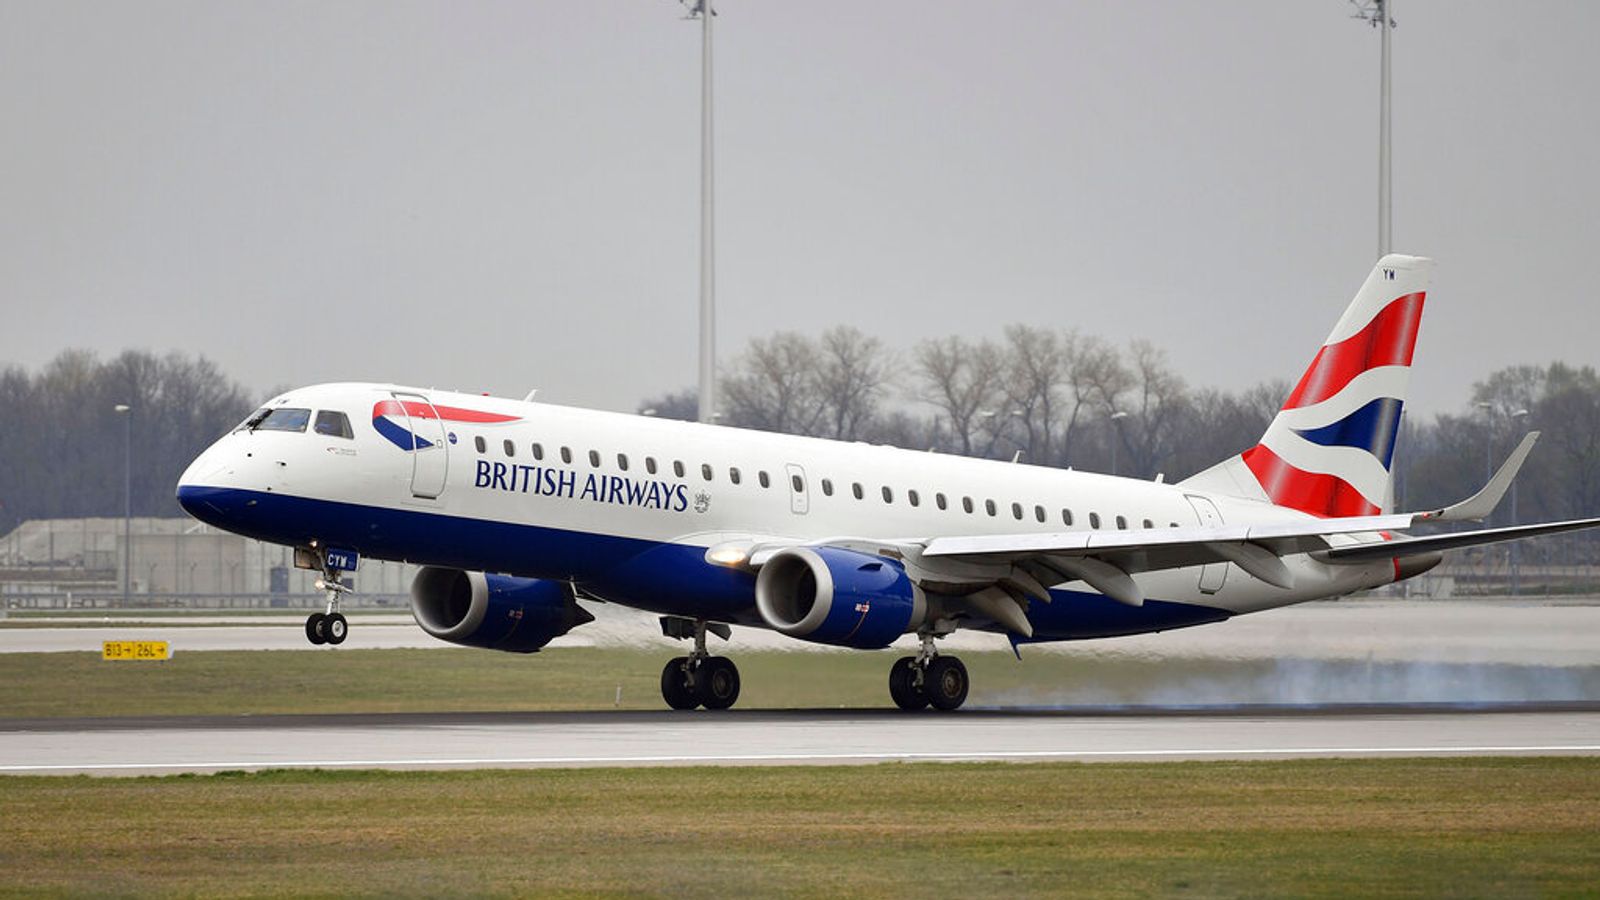 British Airways Pilot Fired For Drug-Fueled Encounter Before Flight